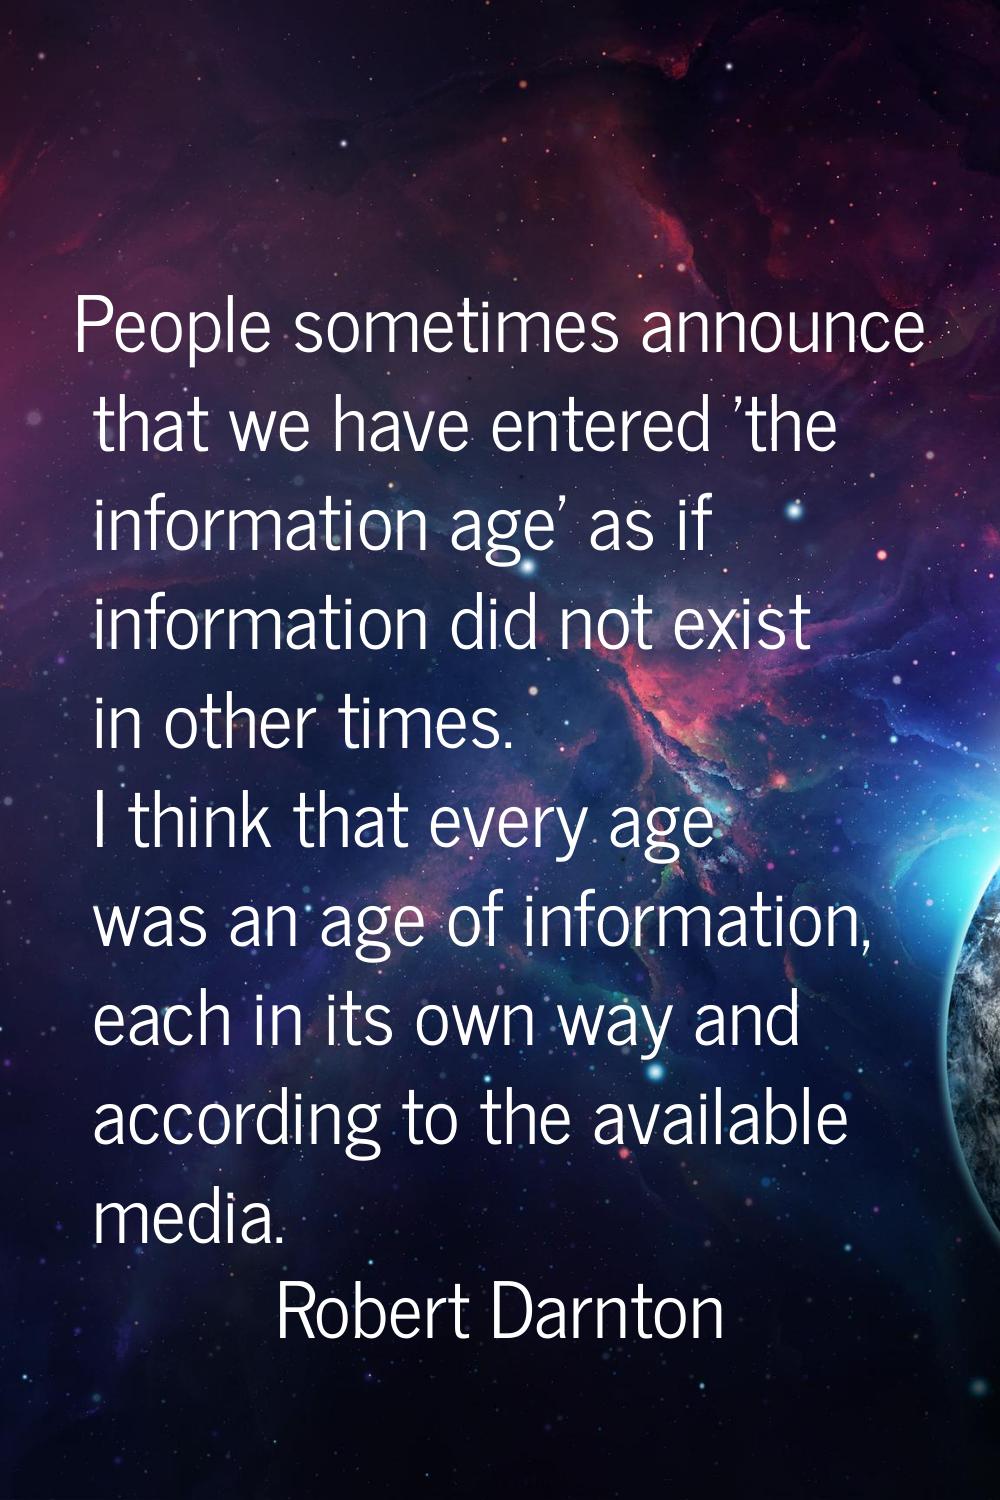 People sometimes announce that we have entered 'the information age' as if information did not exis